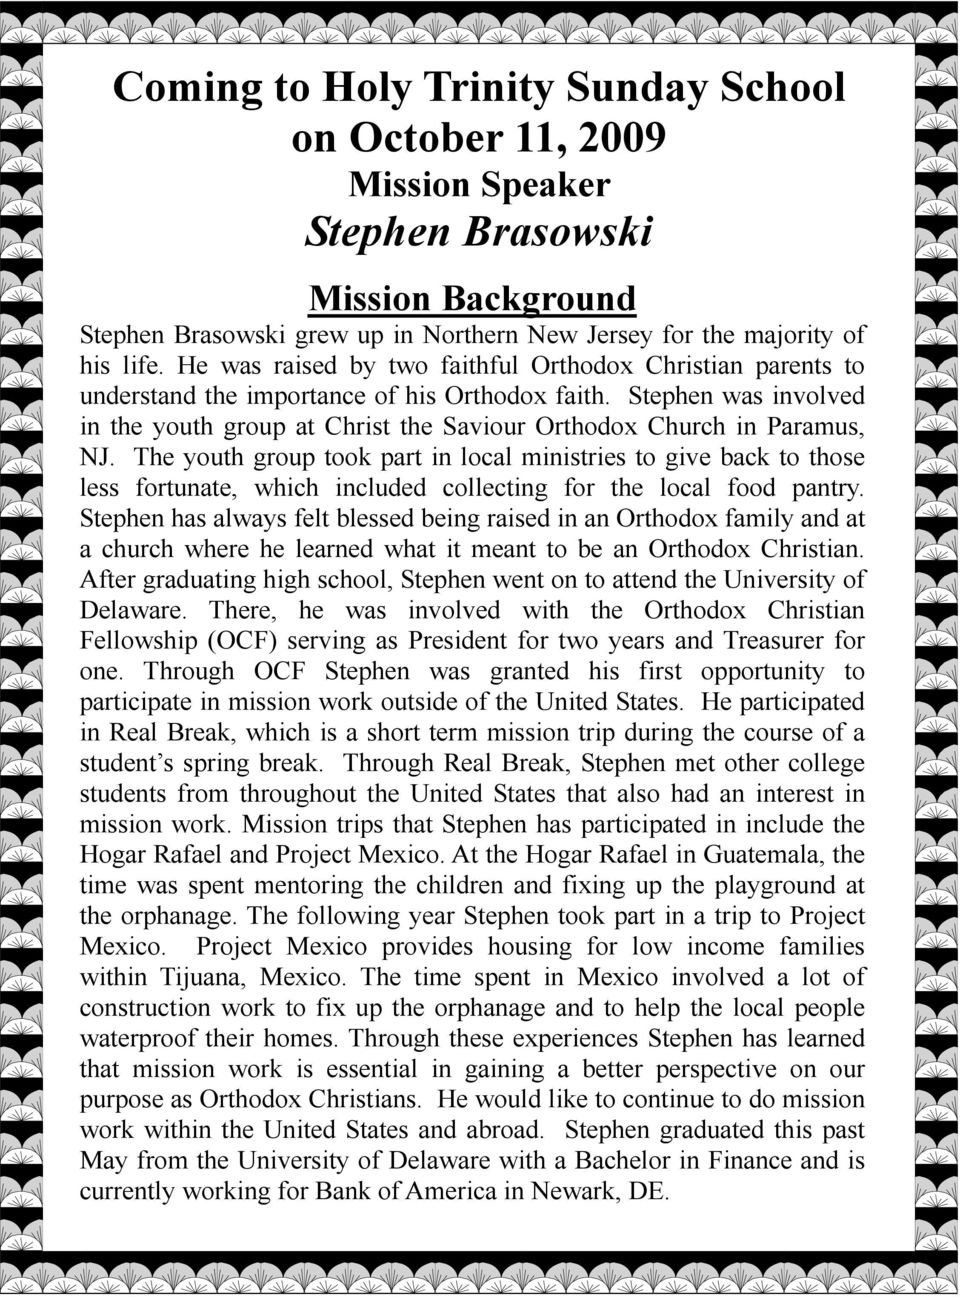 Stephen was involved in the youth group at Christ the Saviour Orthodox Church in Paramus, NJ.